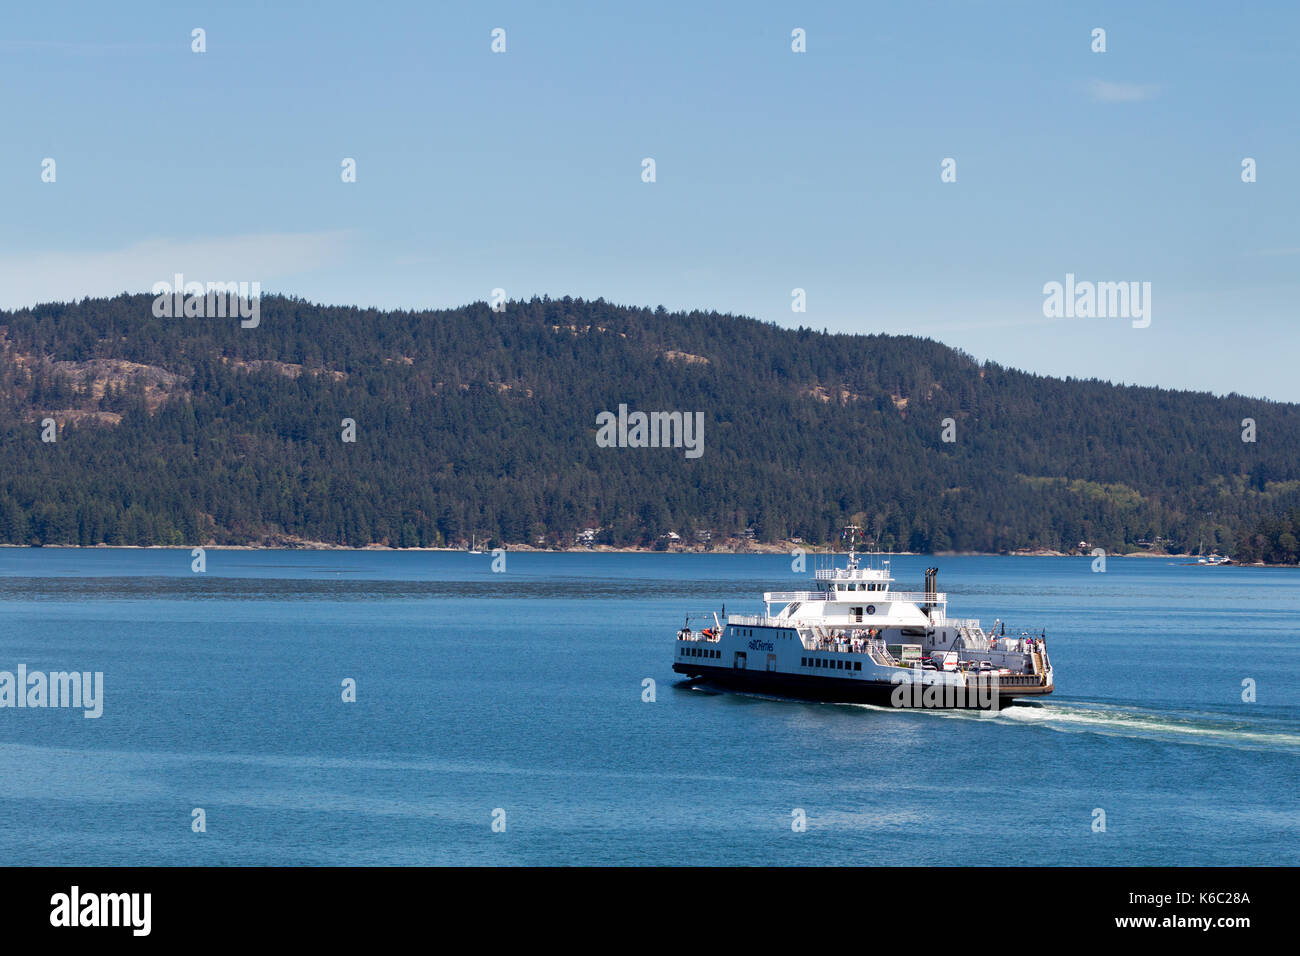 The Skeena Queen, a ferry of BC Ferries, between the Gulf Islands at Vancouver Island, British Columbia, Canada. Stock Photo